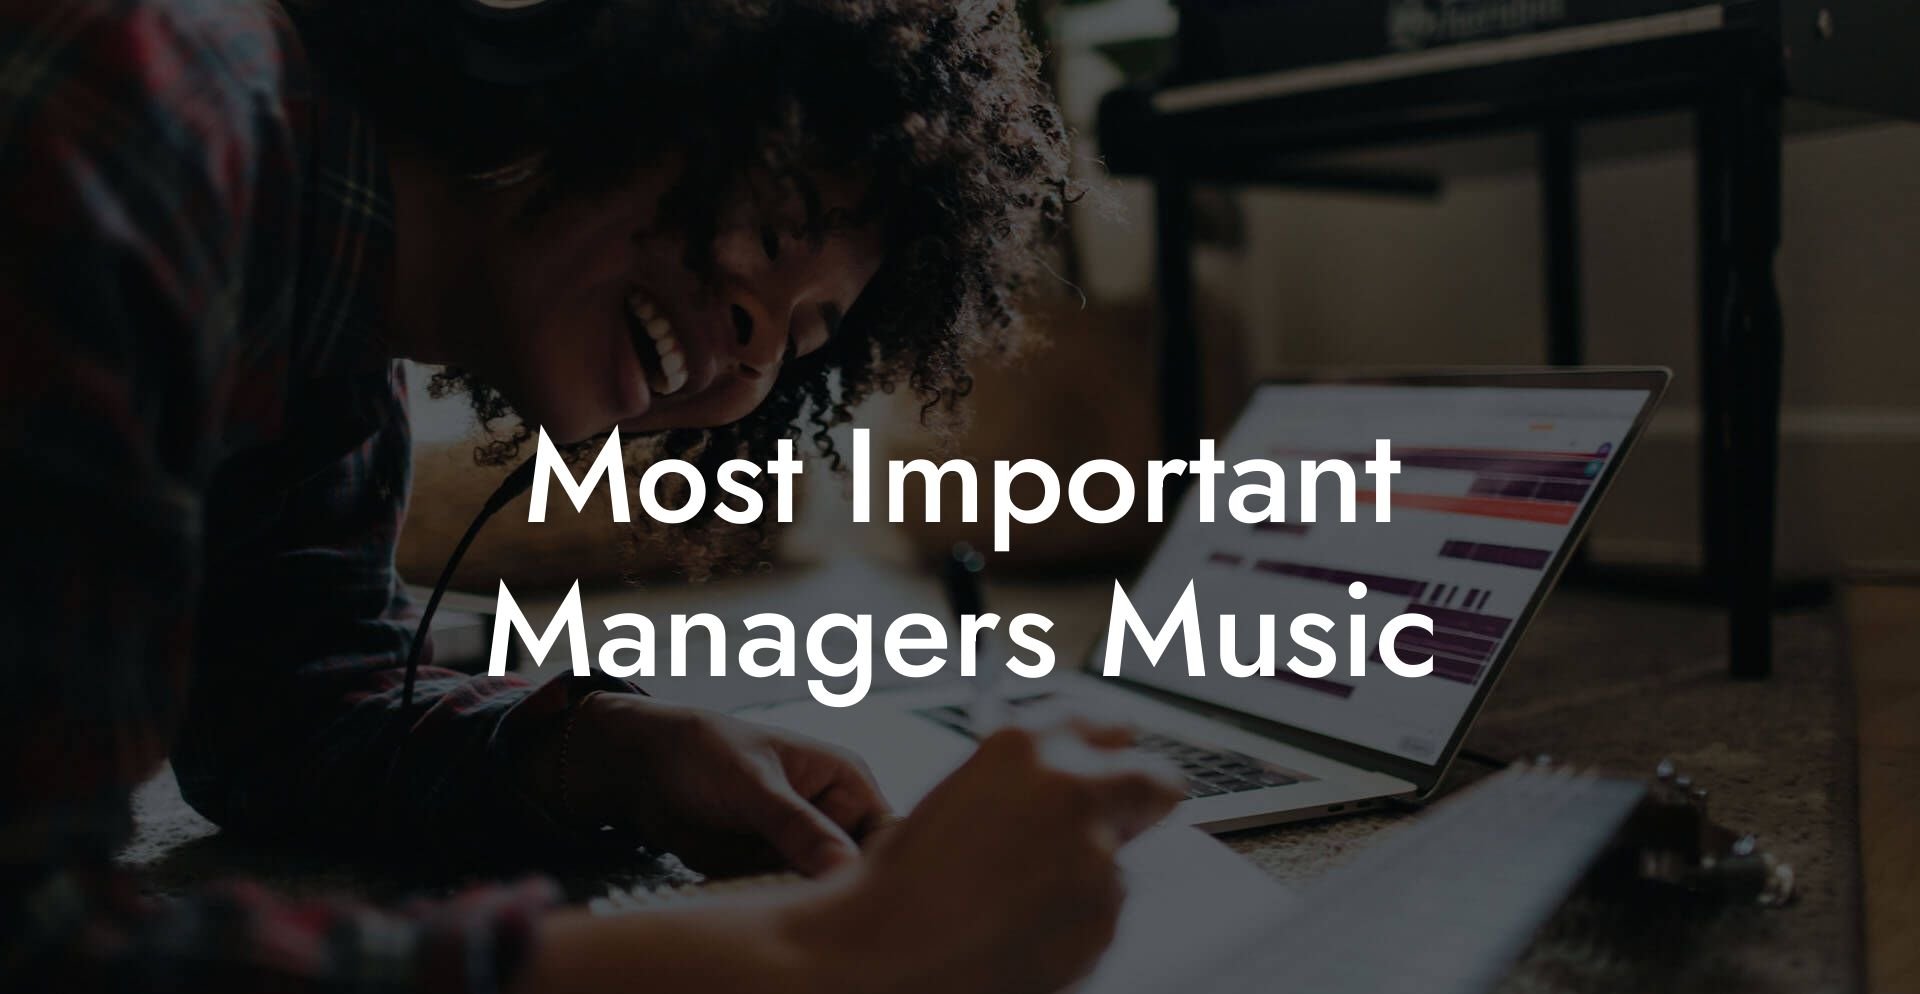 Most Important Managers Music